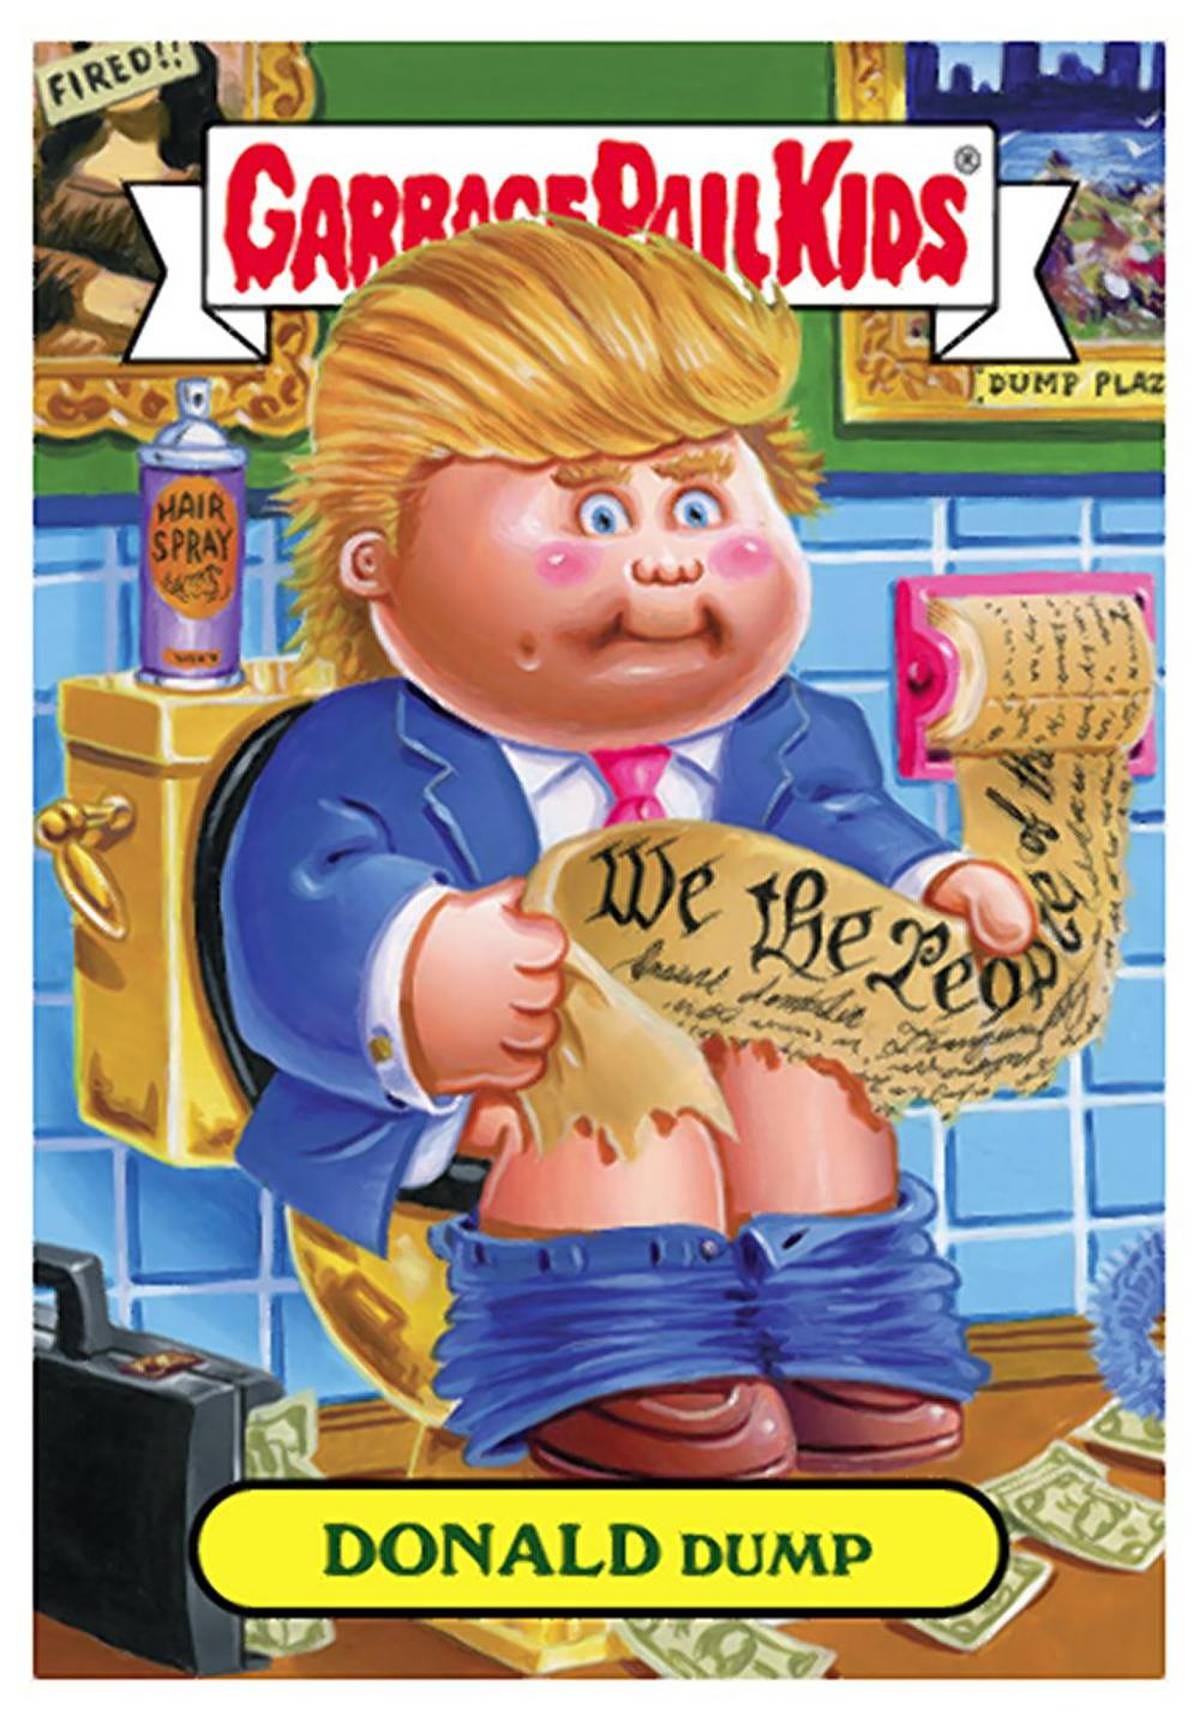 Donald Trump, Hillary Clinton and other presidential candidates get made  into 'Garbage Pail Kids' cards by Topps – New York Daily News